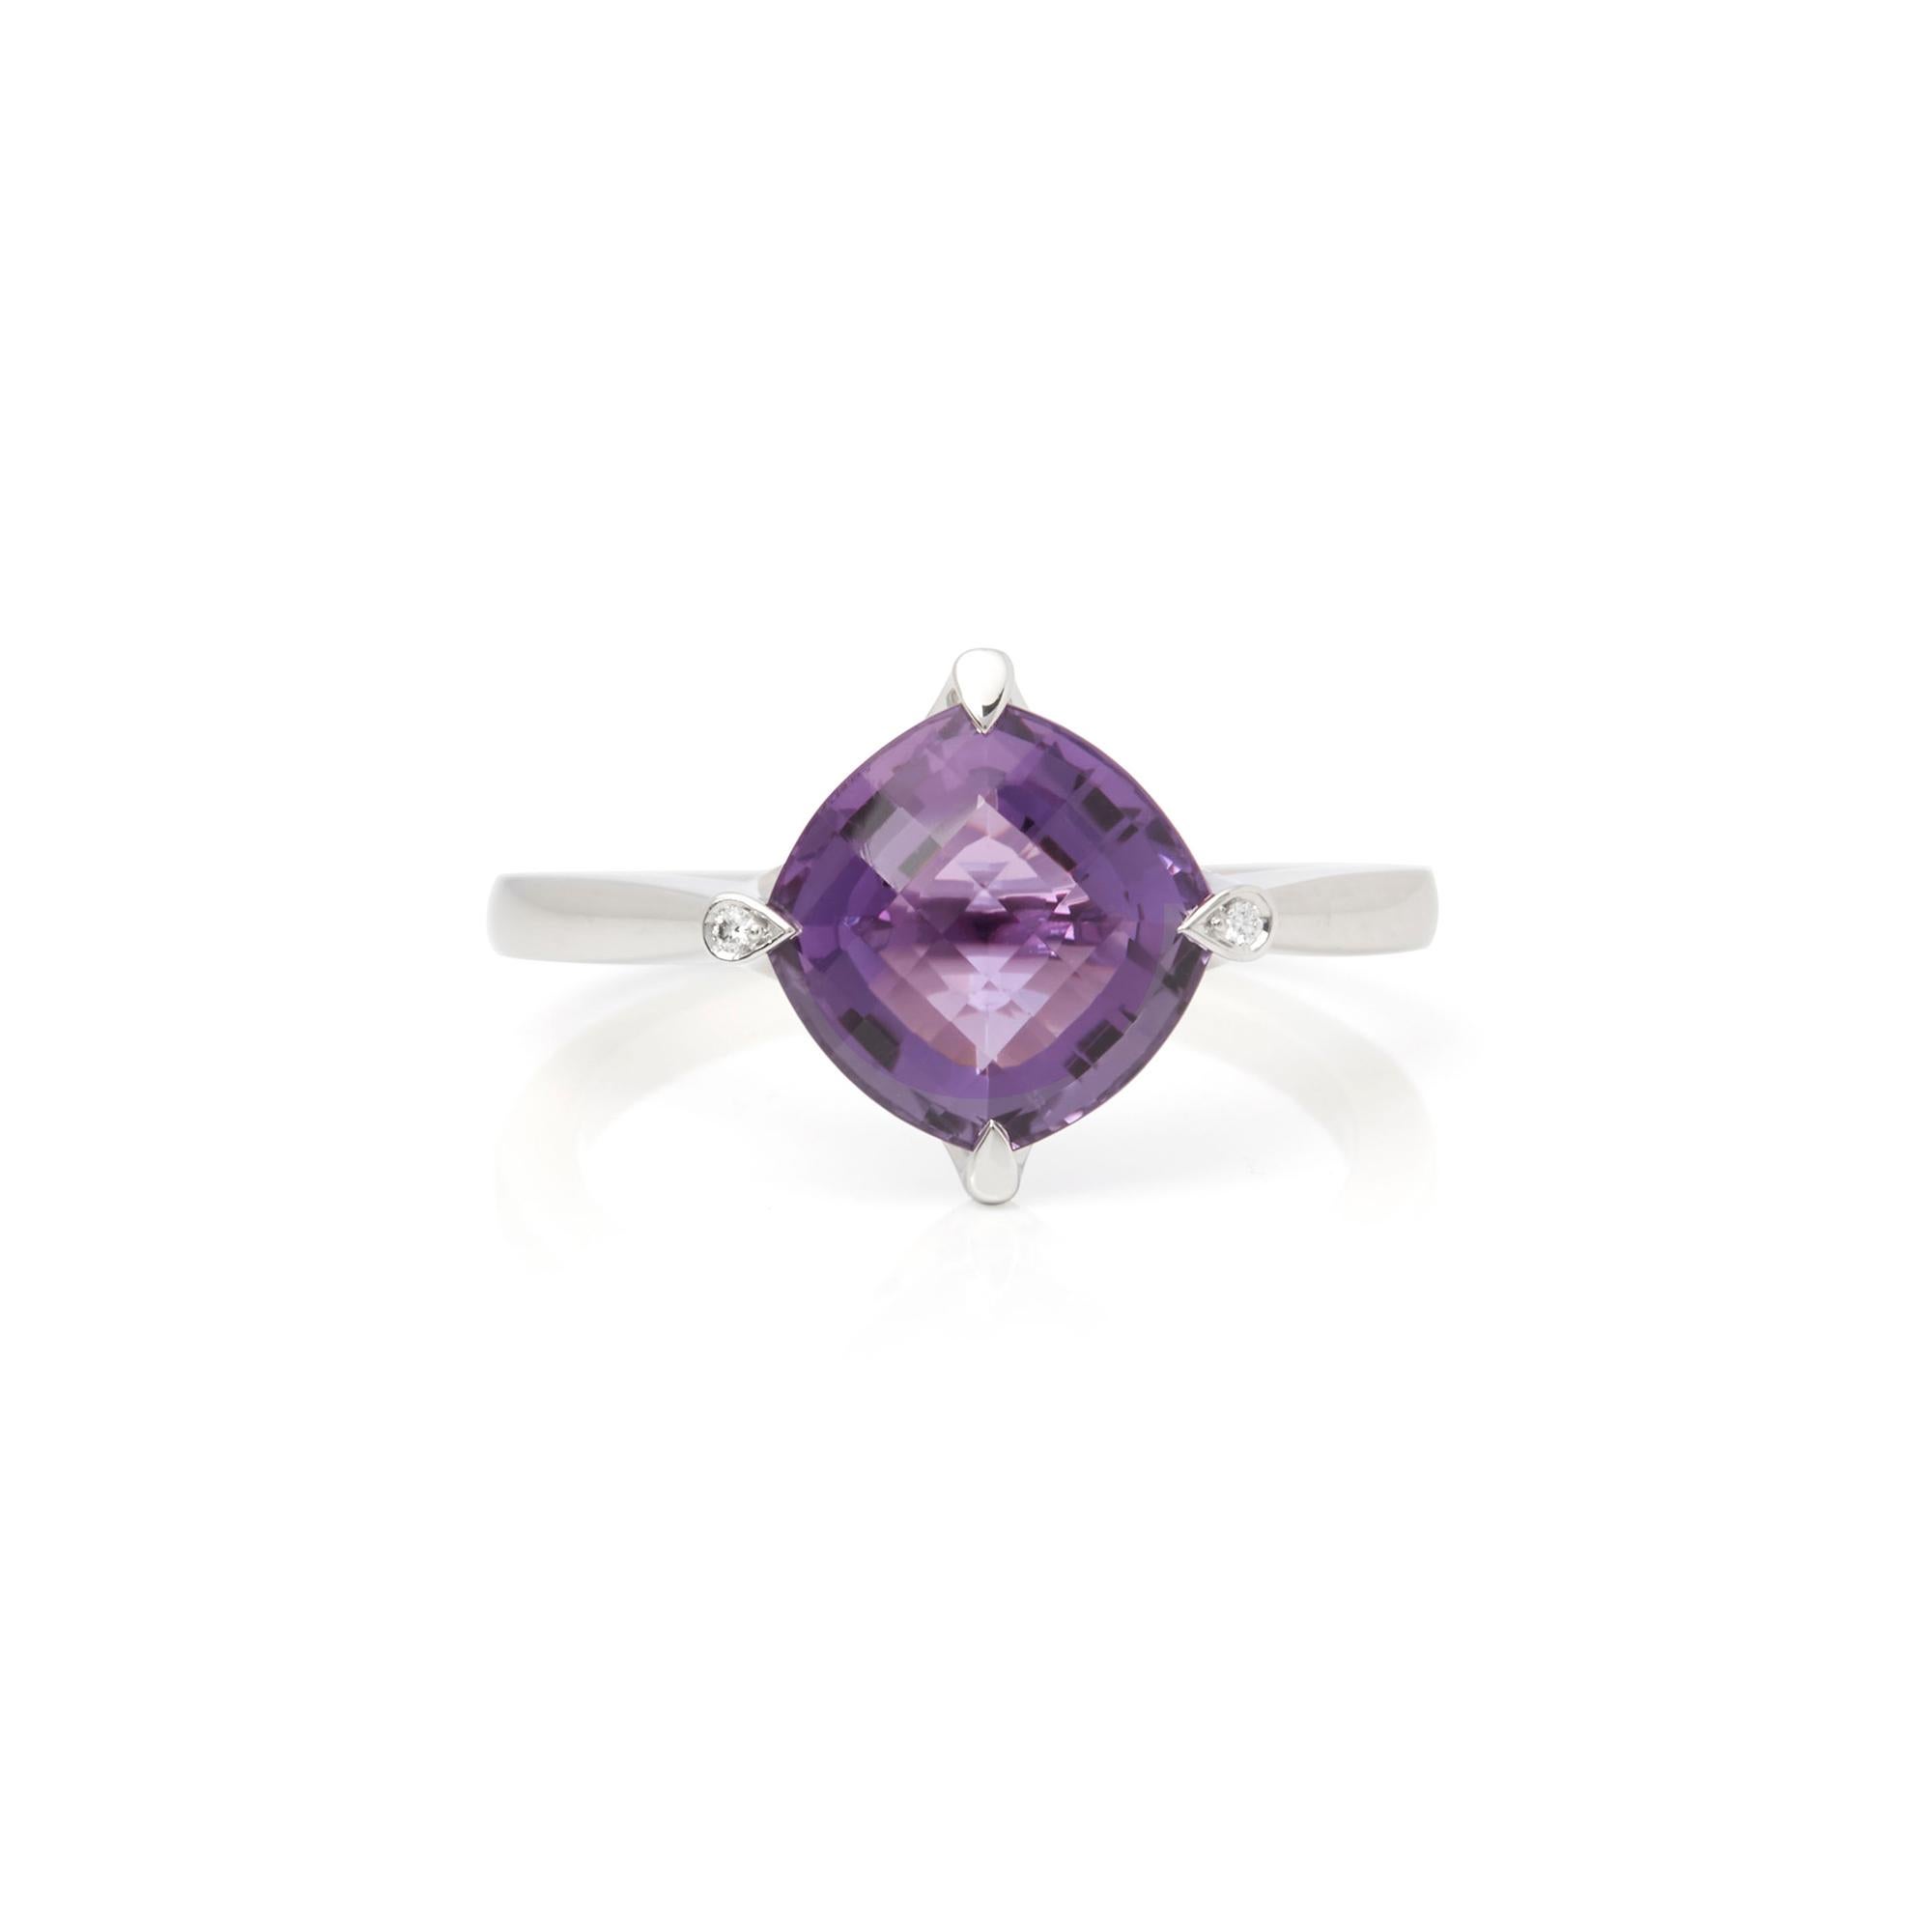 Code: COM2204
Brand: Cartier
Description: 18k White Gold Amethyst Lotus Ring
Accompanied With: Presentation Box
Gender: Ladies
UK Ring Size: N 1/2
EU Ring Size: 55
US Ring Size: 7
Resizing Possible?: YES
Band Width: 1.5mm
Condition: 9
Material: